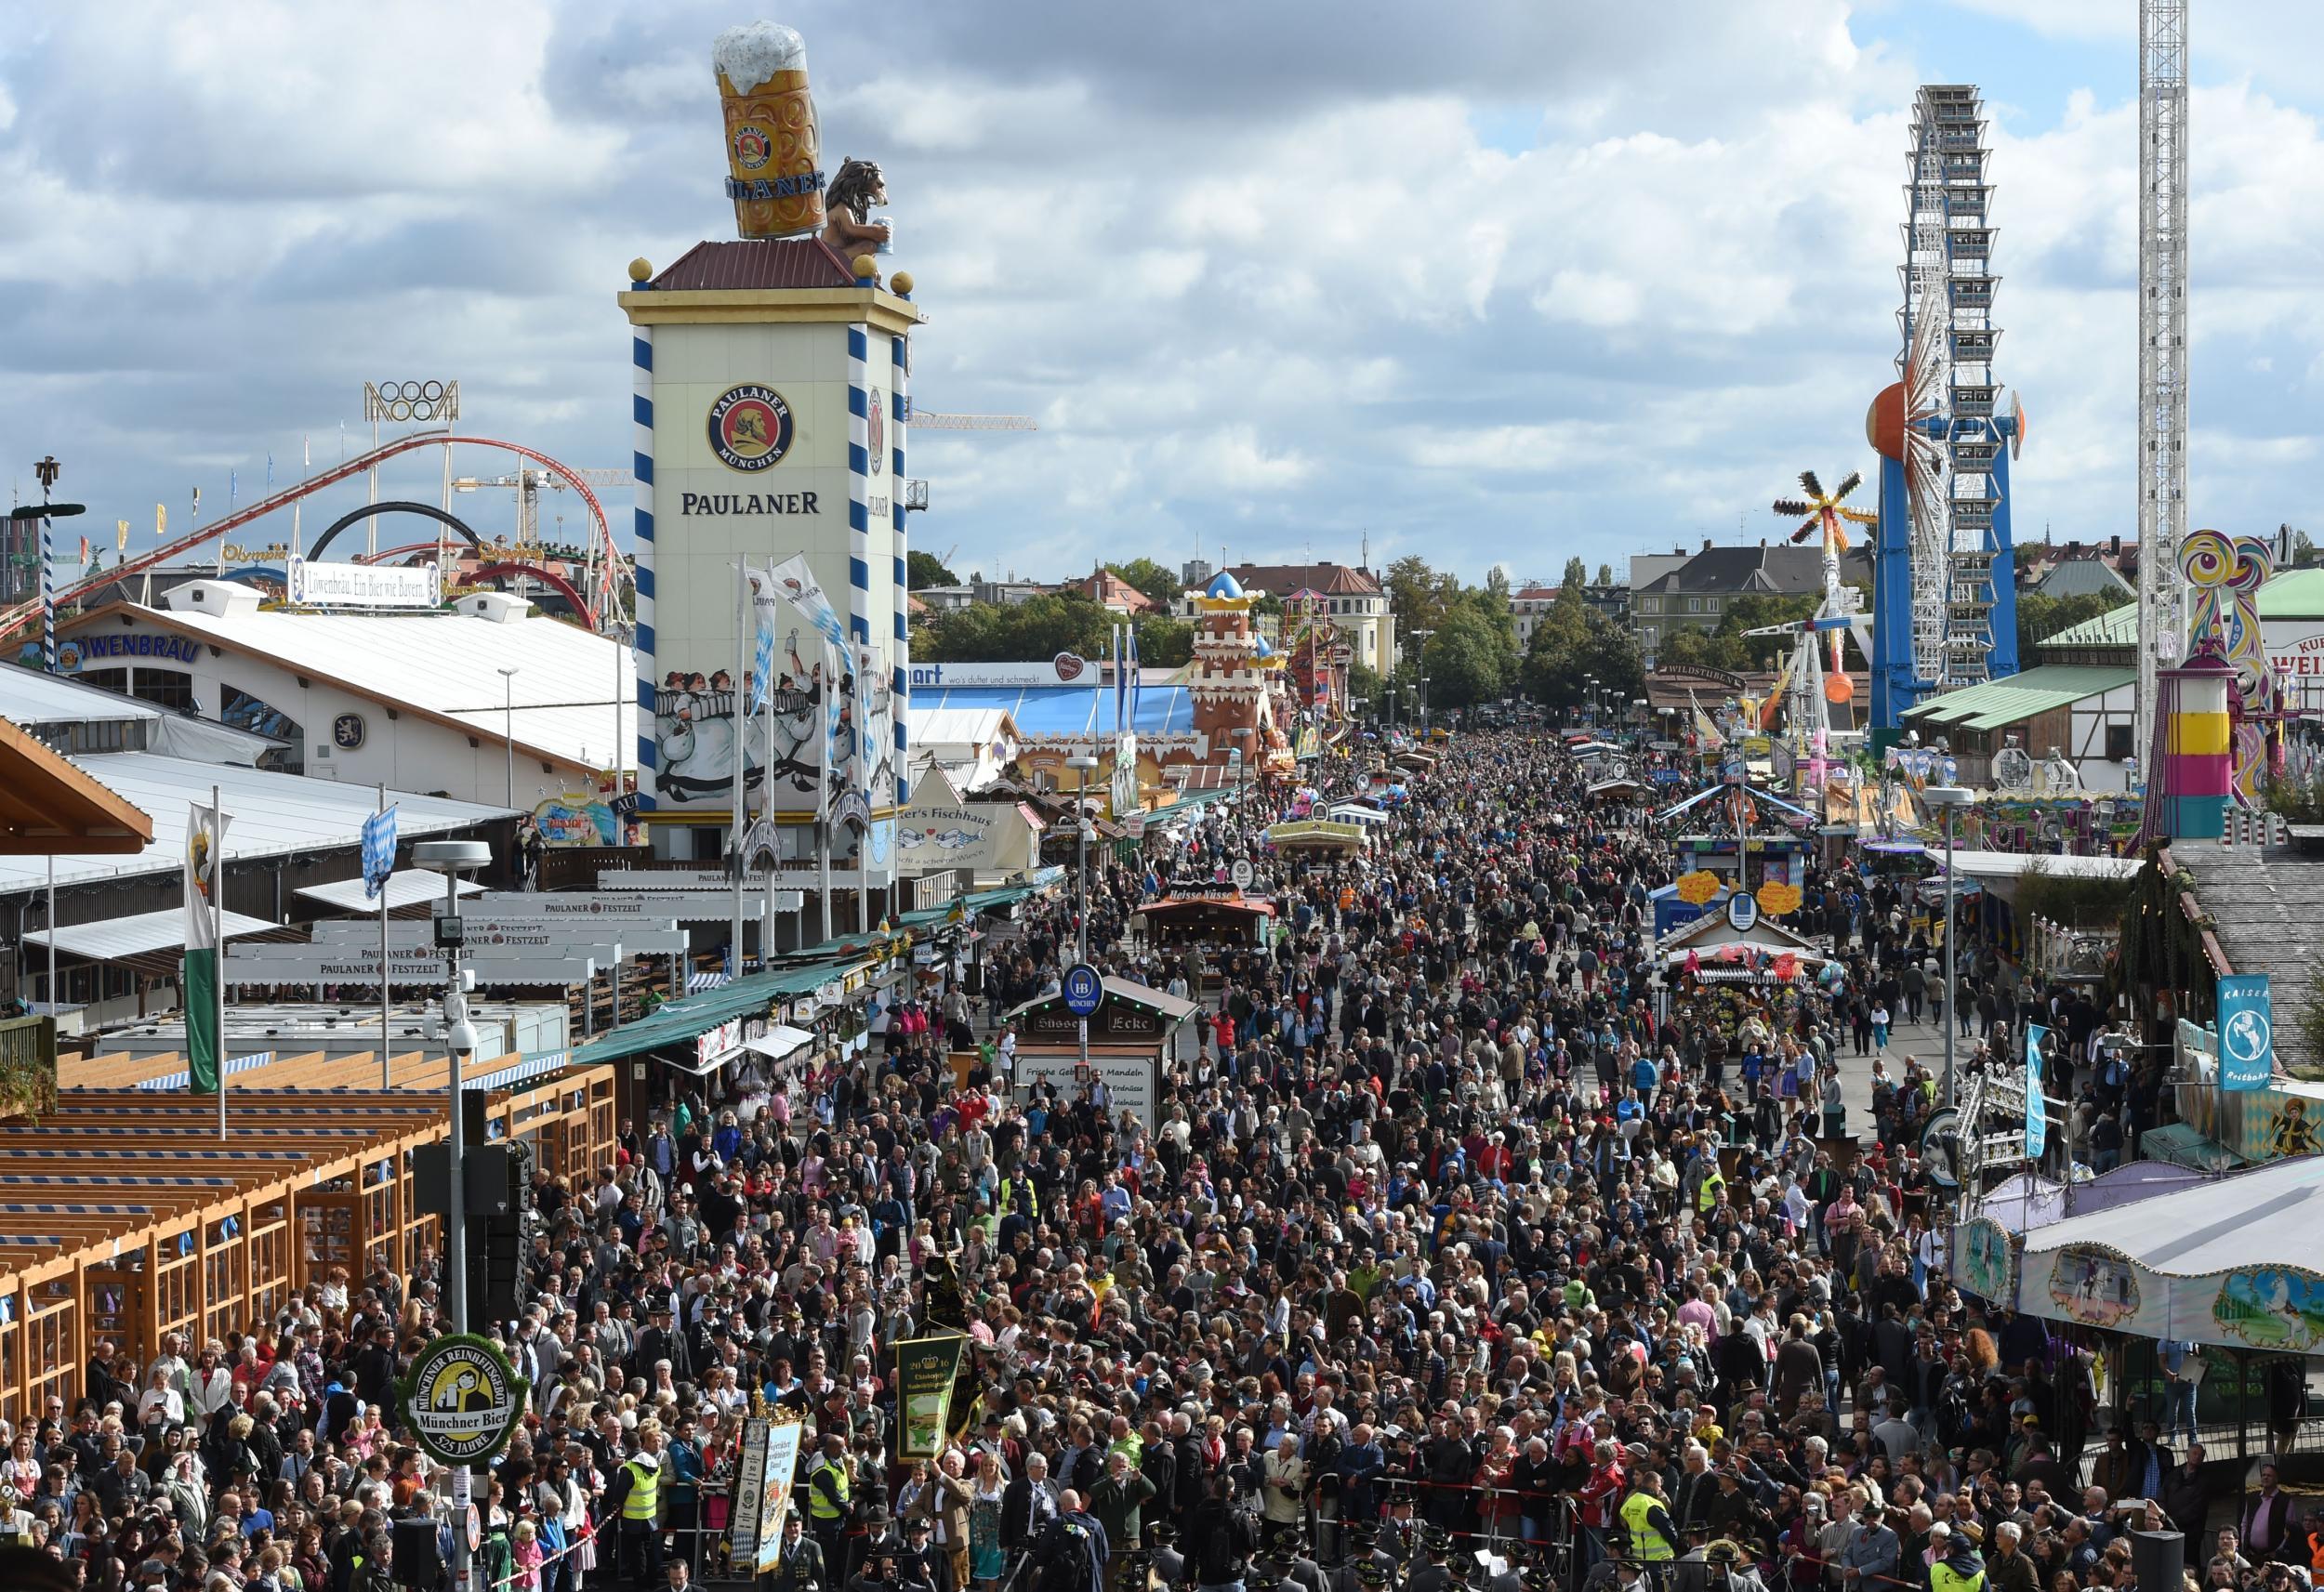 Oktoberfest in Munich is a less-than-wise pairing of fairground rides and beer